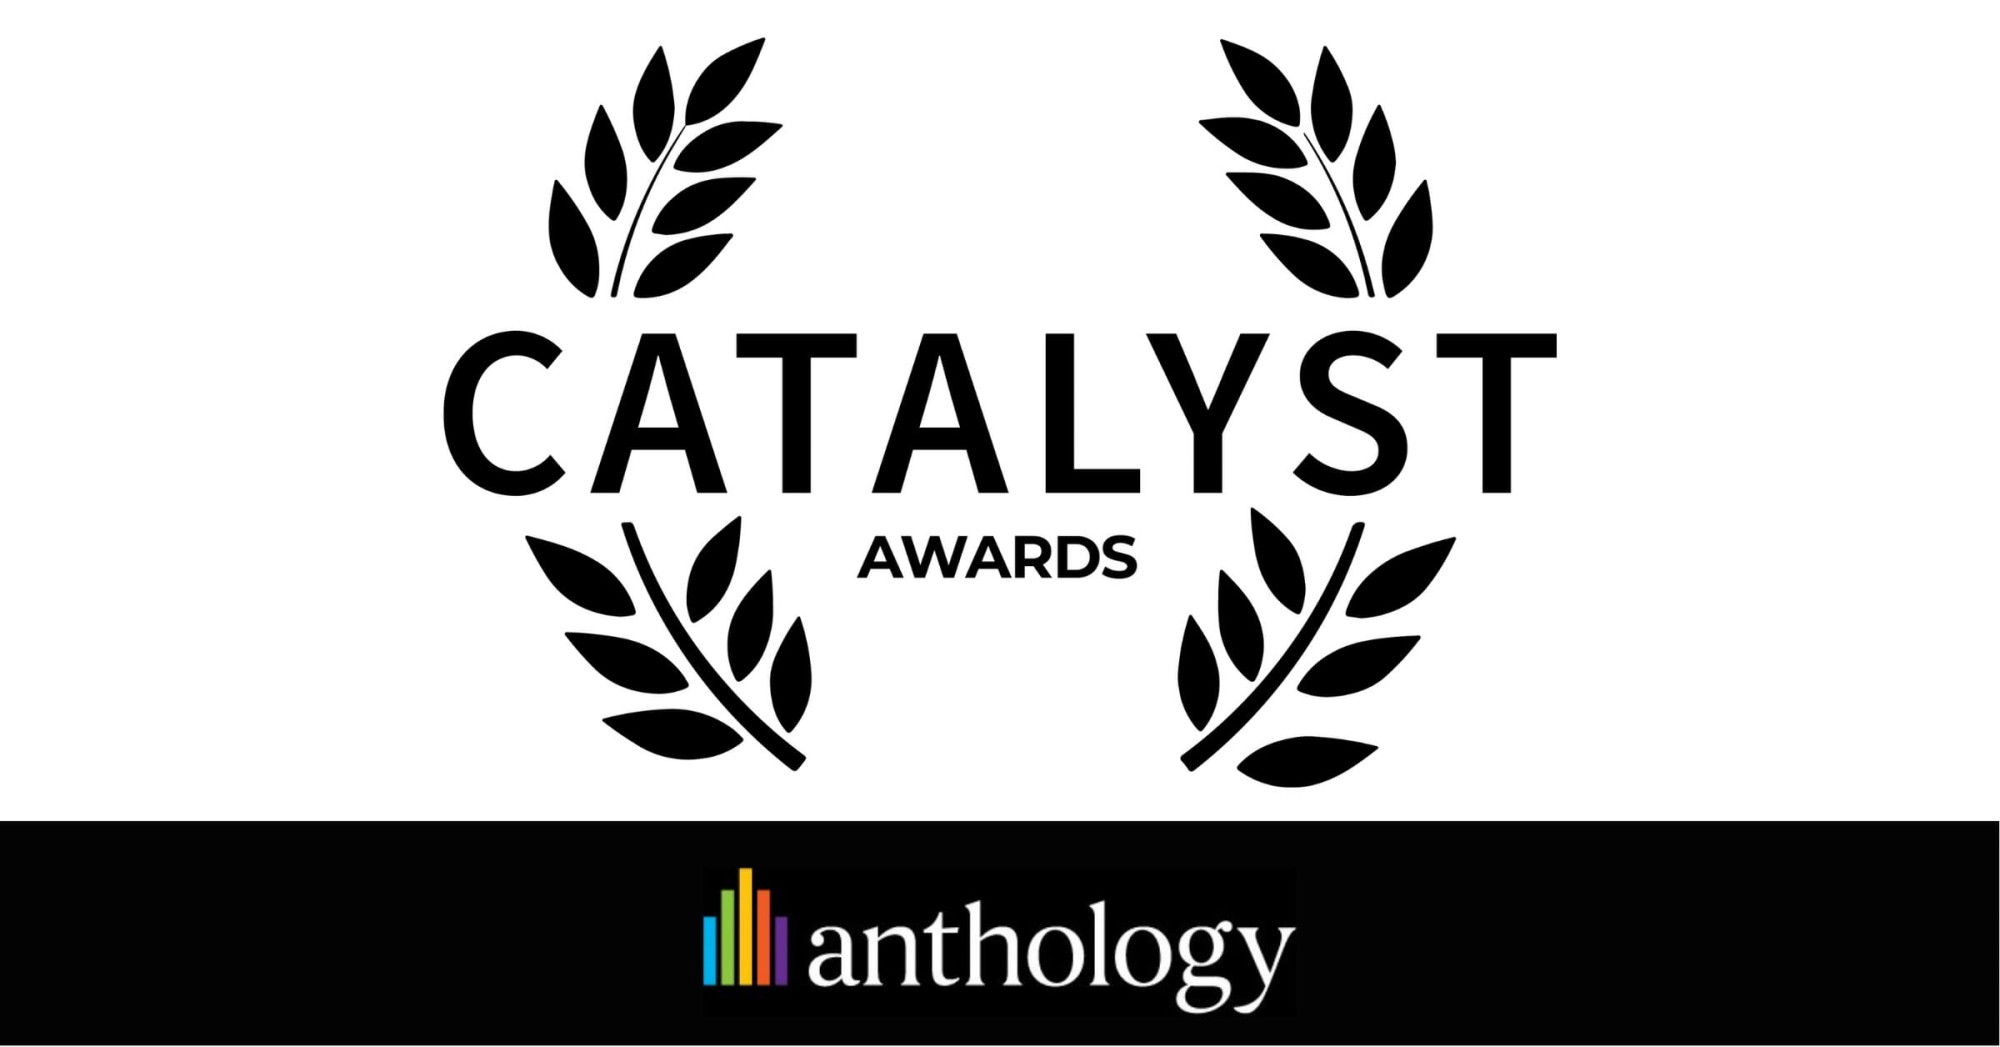 Anthology Announces Winners of the 2022 Catalyst Awards